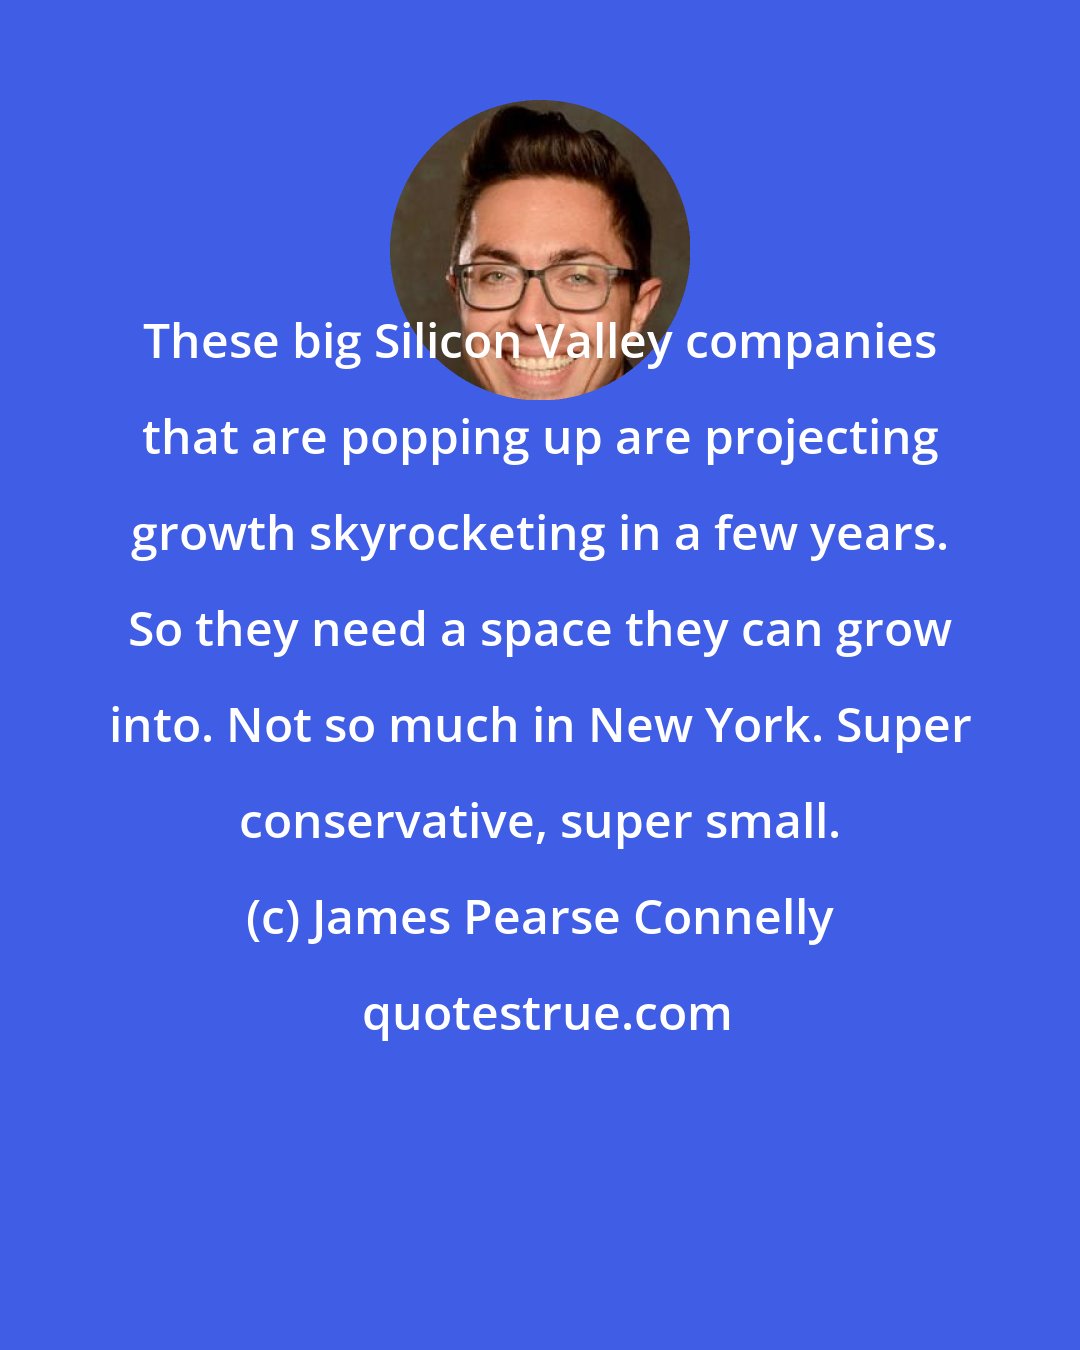 James Pearse Connelly: These big Silicon Valley companies that are popping up are projecting growth skyrocketing in a few years. So they need a space they can grow into. Not so much in New York. Super conservative, super small.